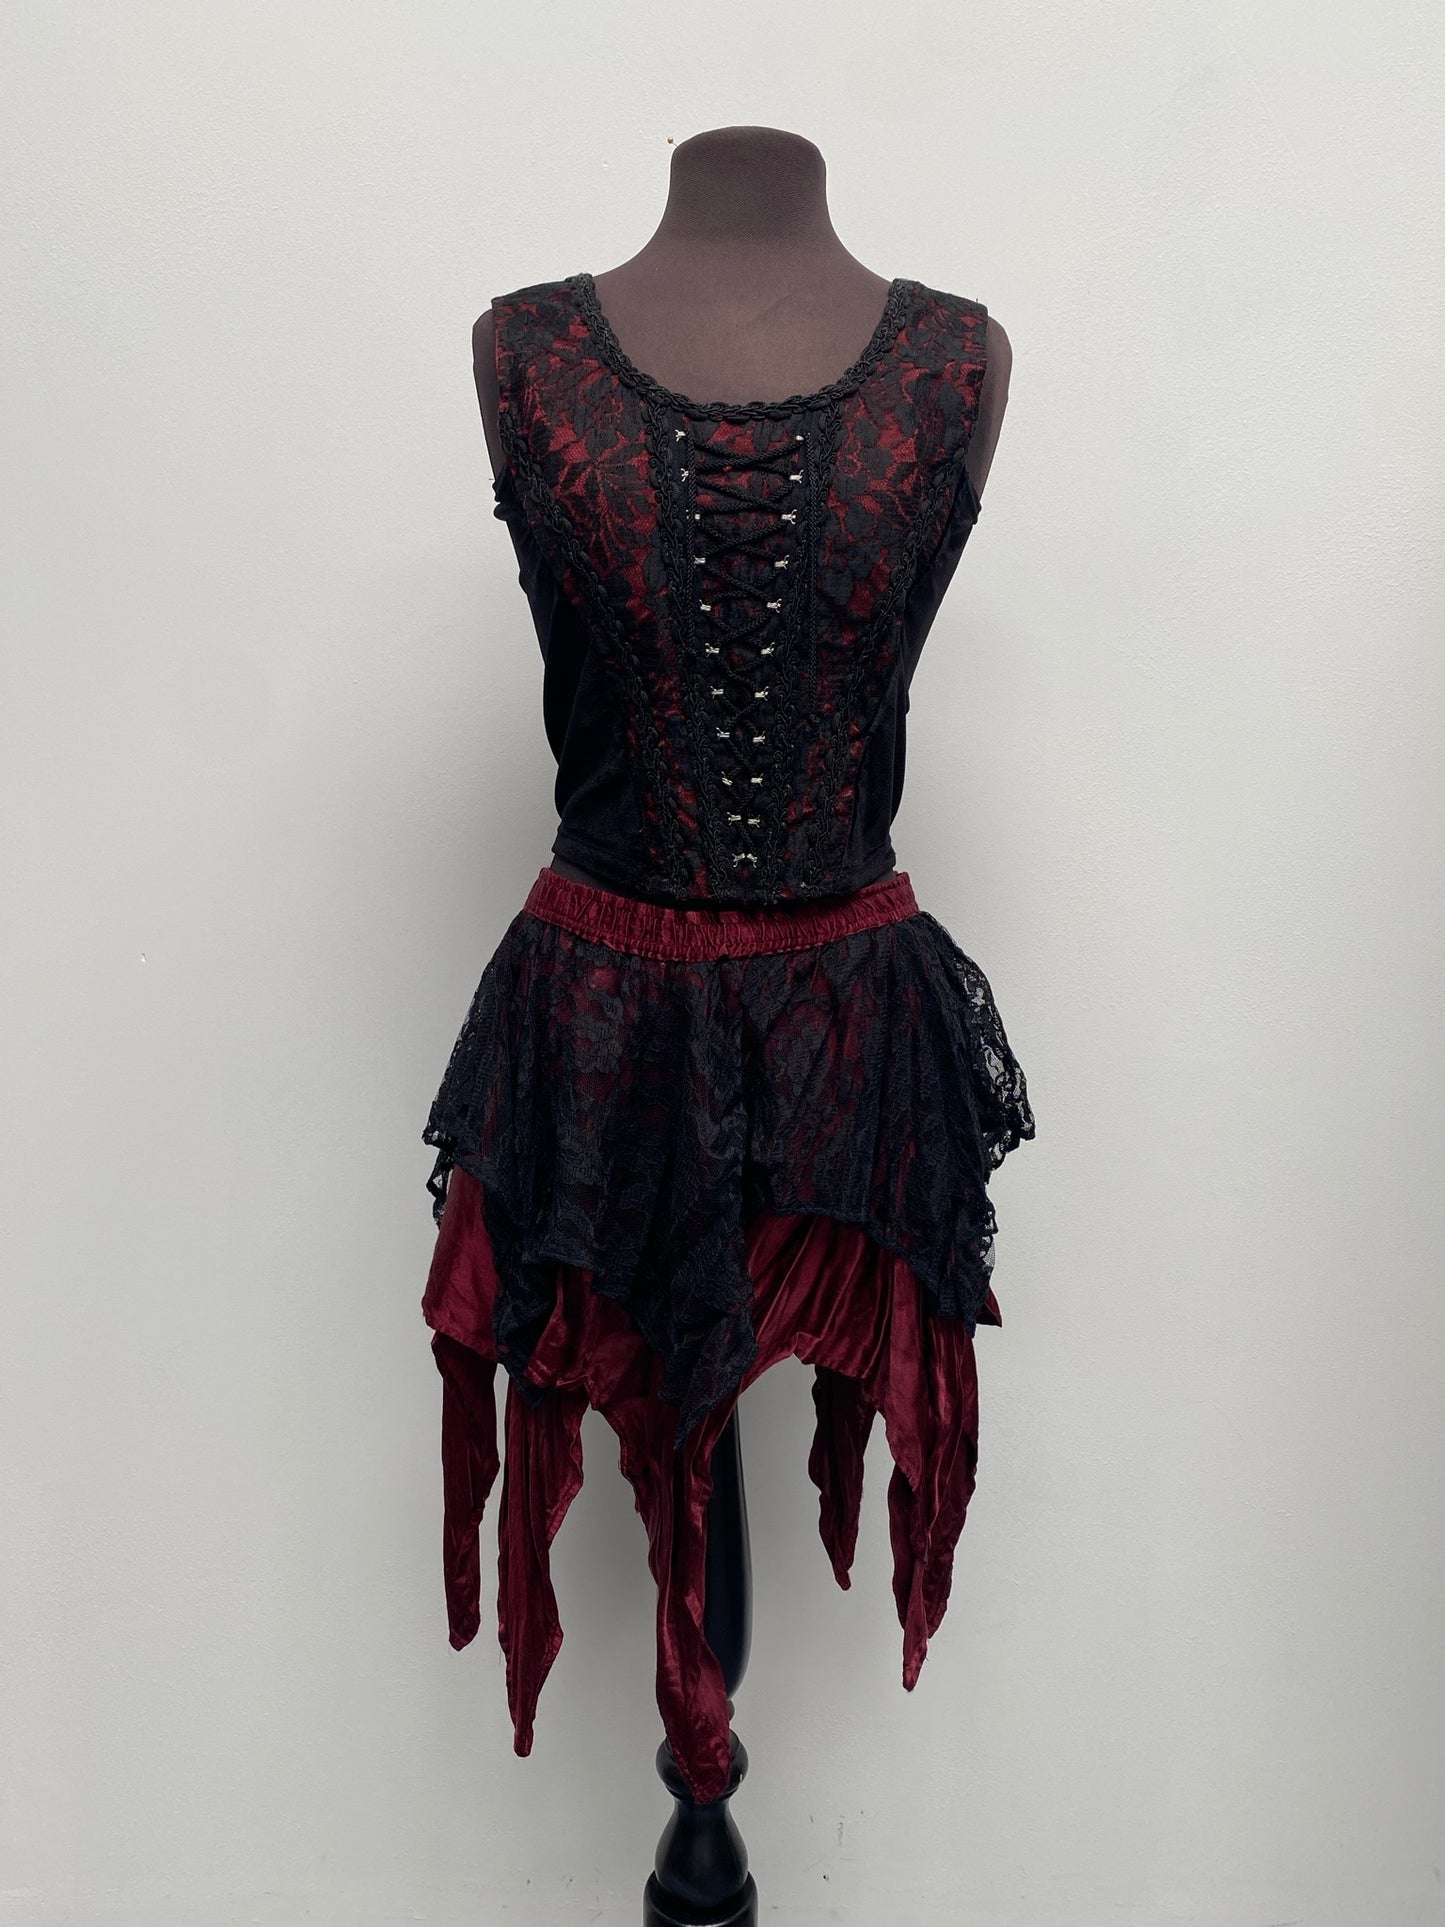 Bares 2 piece Gothic Outfit - Skirt & Top Red Black S/M